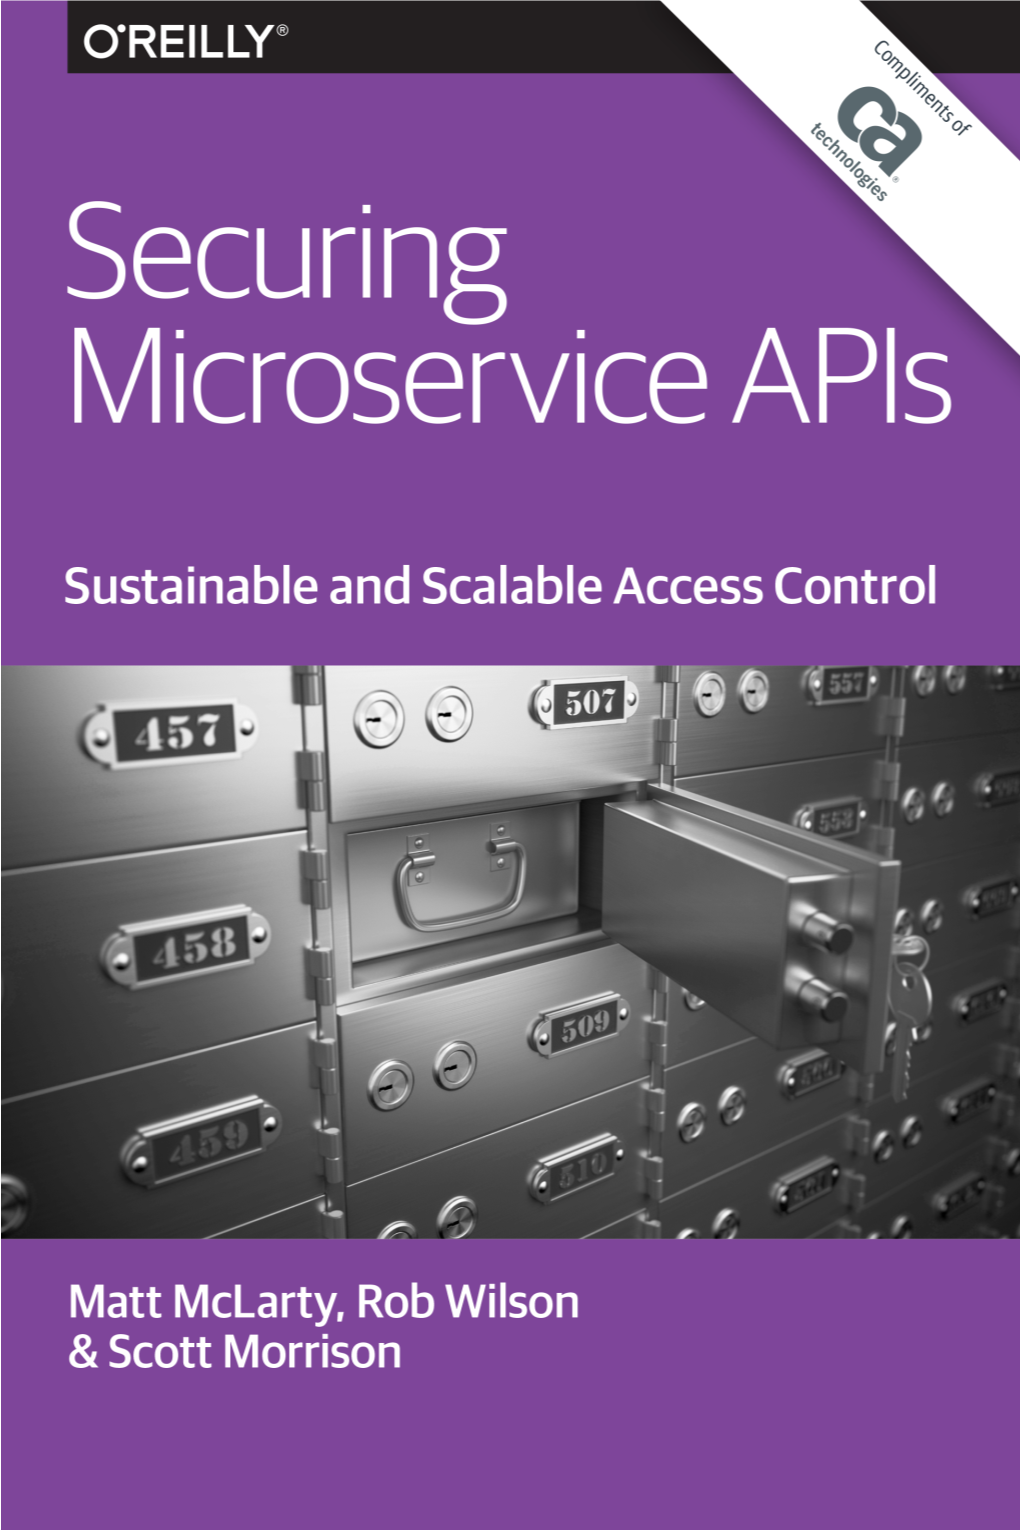 API Access Control for Microservices 3 Microservice Architecture Qualities 4